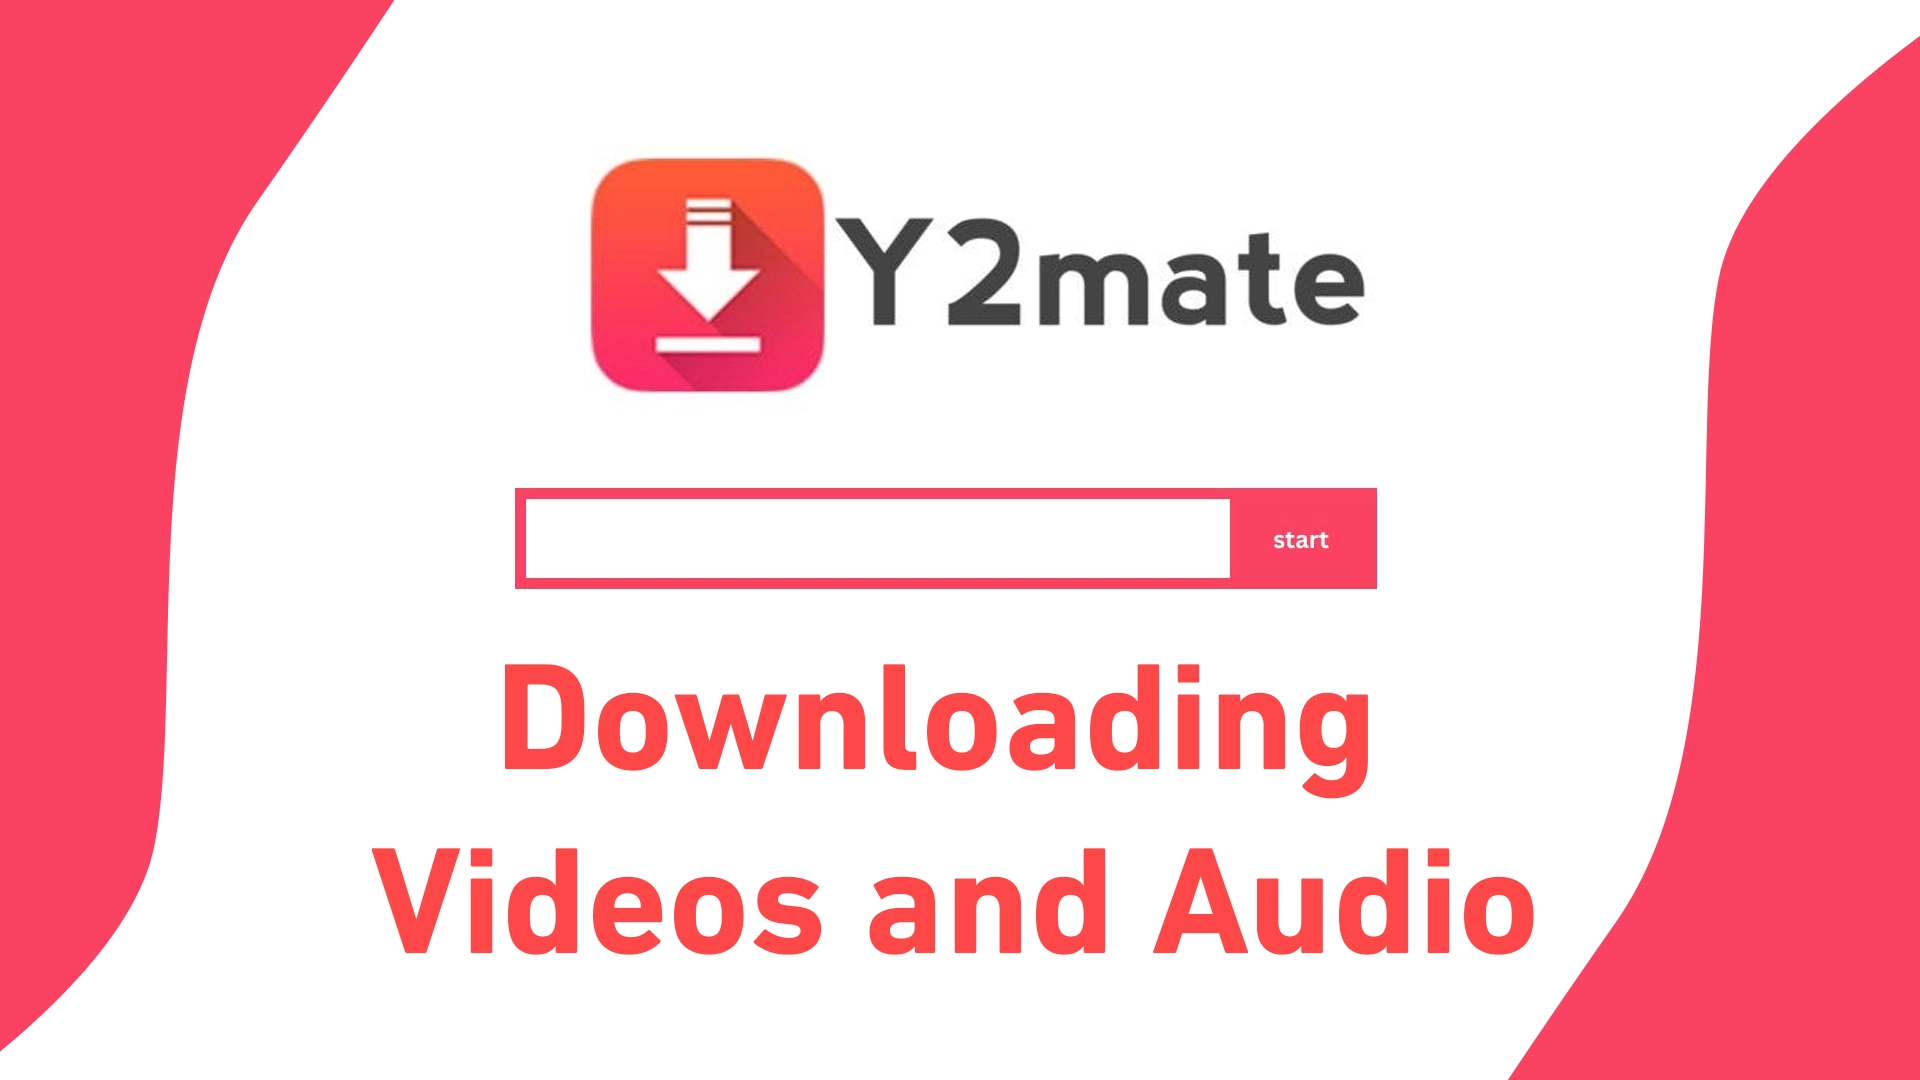 Y2mate: Ultimate Guide to Download Videos and Audio